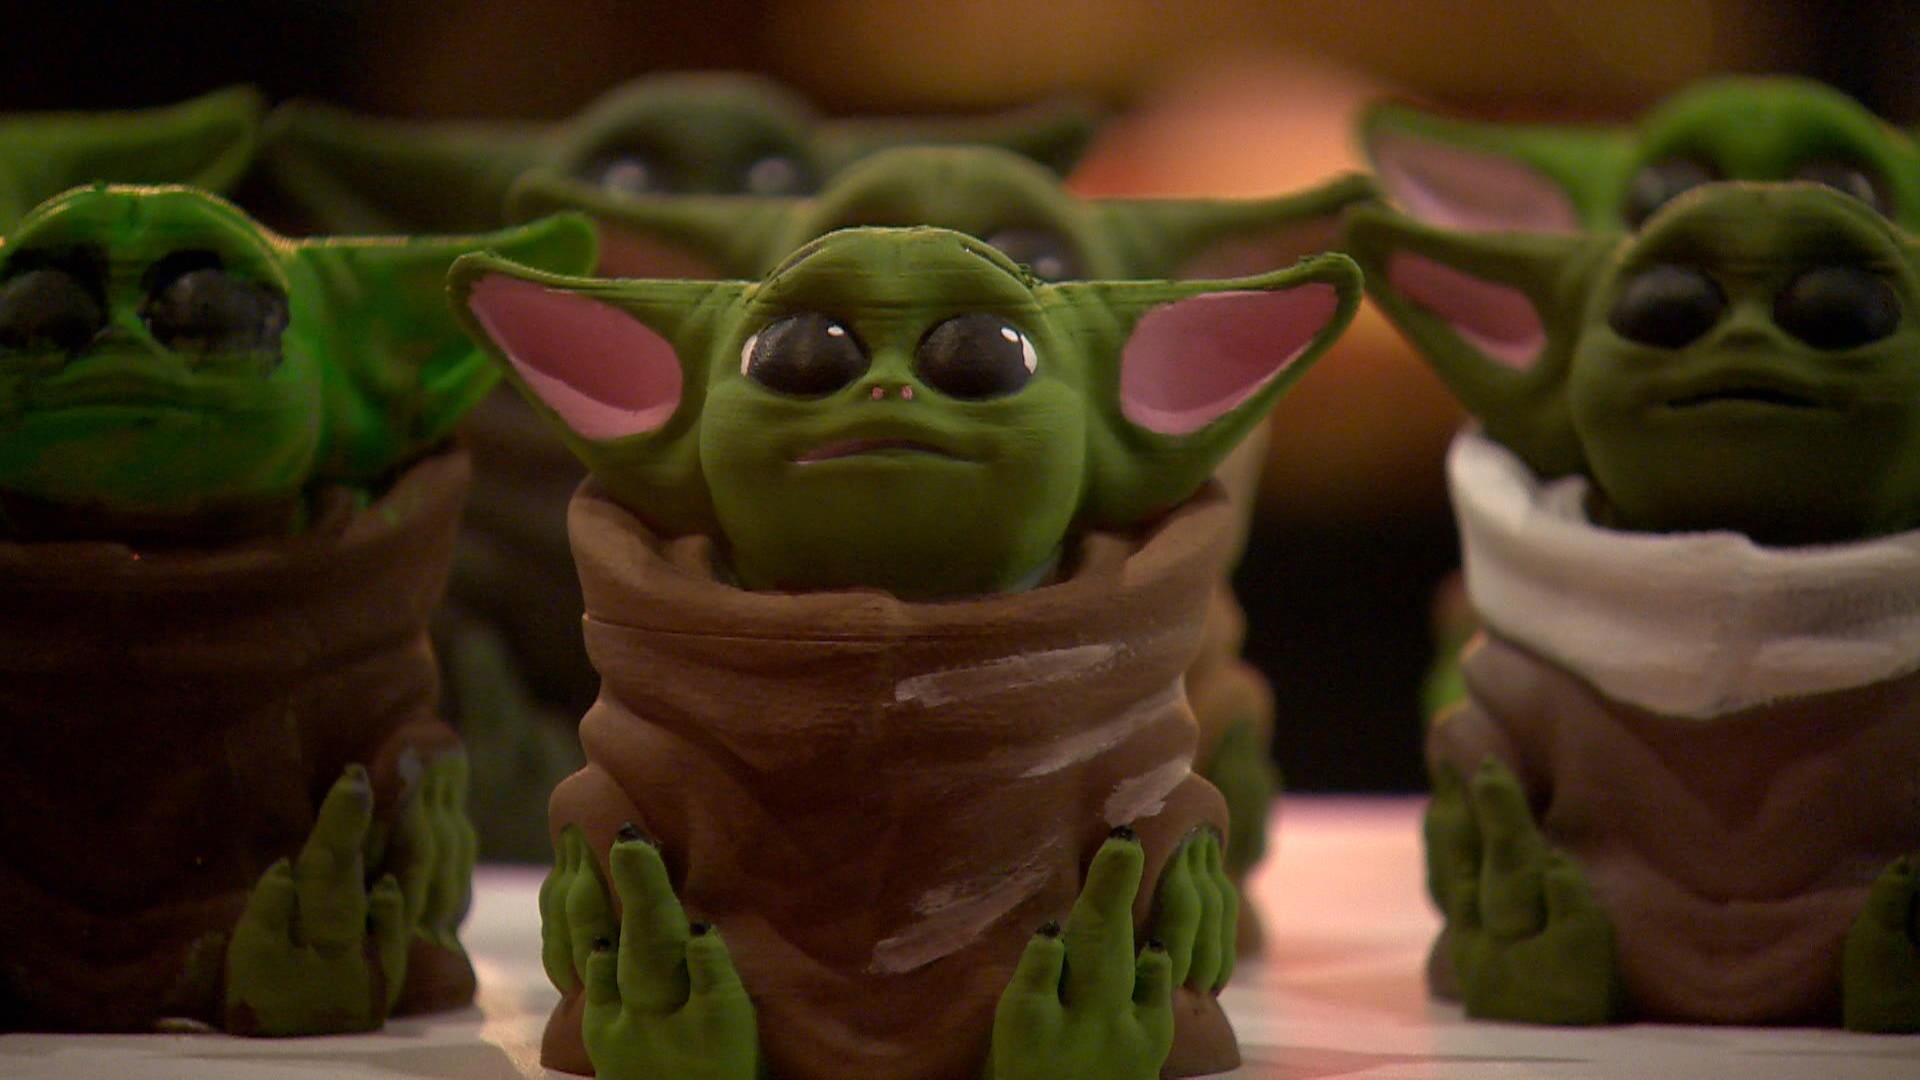 Wave of the Future 3D Printing names January 'Baby Yoda' month